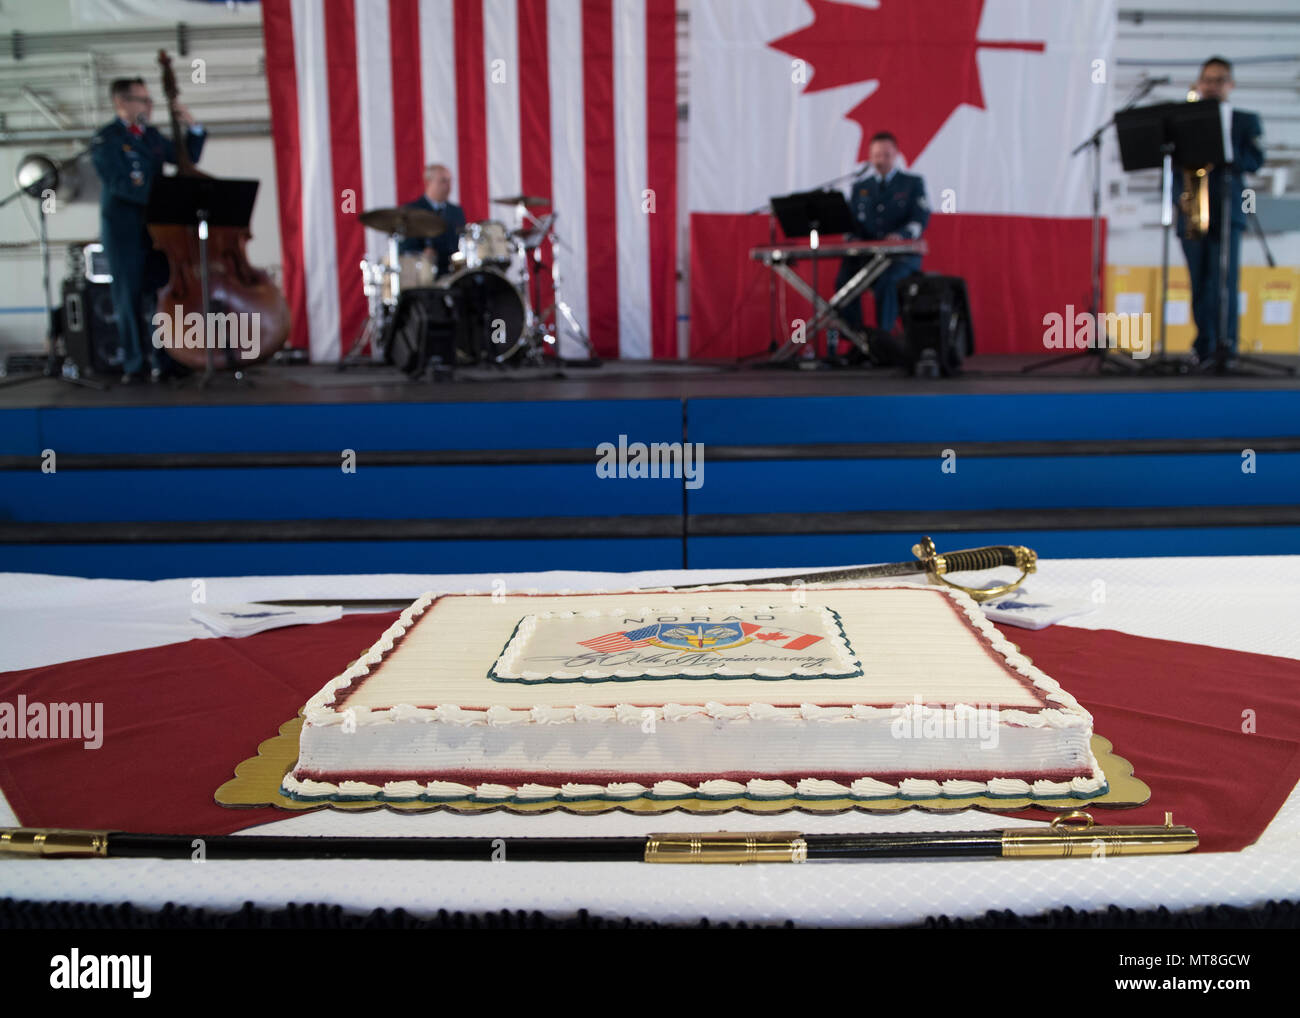 A celebratory cake is displayed during the North American Aerospace Defense Command's 60th Anniversary Ceremony on Peterson Air Force Base Colorado, May 12, 2018. The ceremony and static display of various NORAD aircraft was the culmination of a three-day event, which included a media tour of Cheyenne Mountain Air Force Station, the dedication of a cairn outside the commands' headquarters building memorializing the Canadians who have passed away while serving NORAD, and a fly over in missing-man formation performed by the Royal Canadian Air Force's Snowbirds aerial demonstration team. (DoD pho Stock Photo